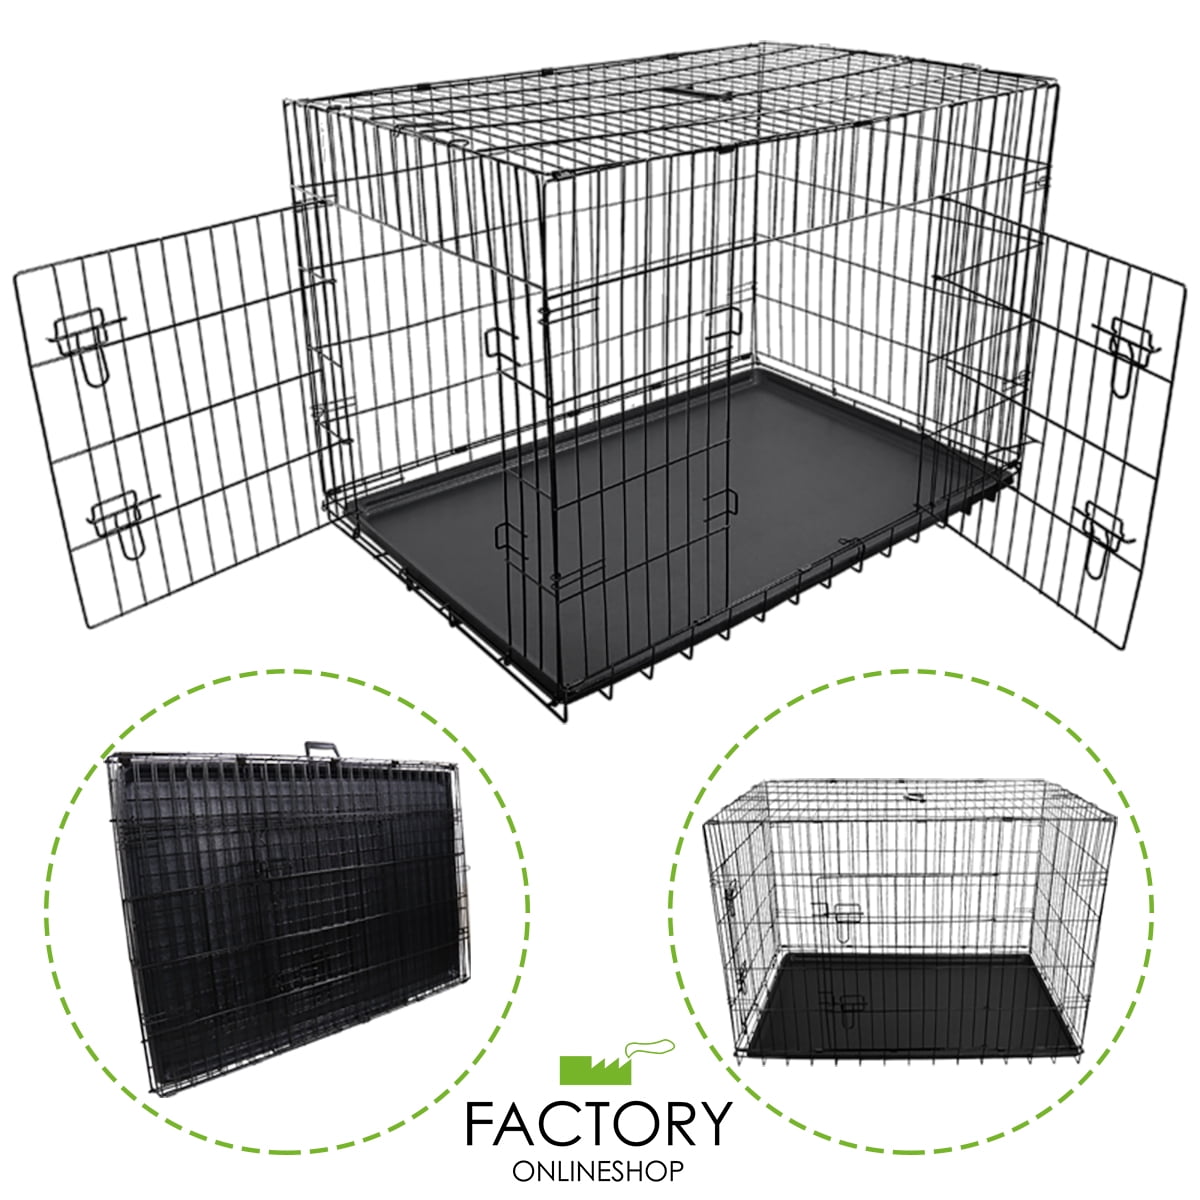 Removable & Washable Pan Tray iMounTEK Folding Metal Pet Dog Puppy Cat Cage Crate Kennel W/Tray 2 Doors Wire Cage for Training Rust Resistant Quick Assembly 